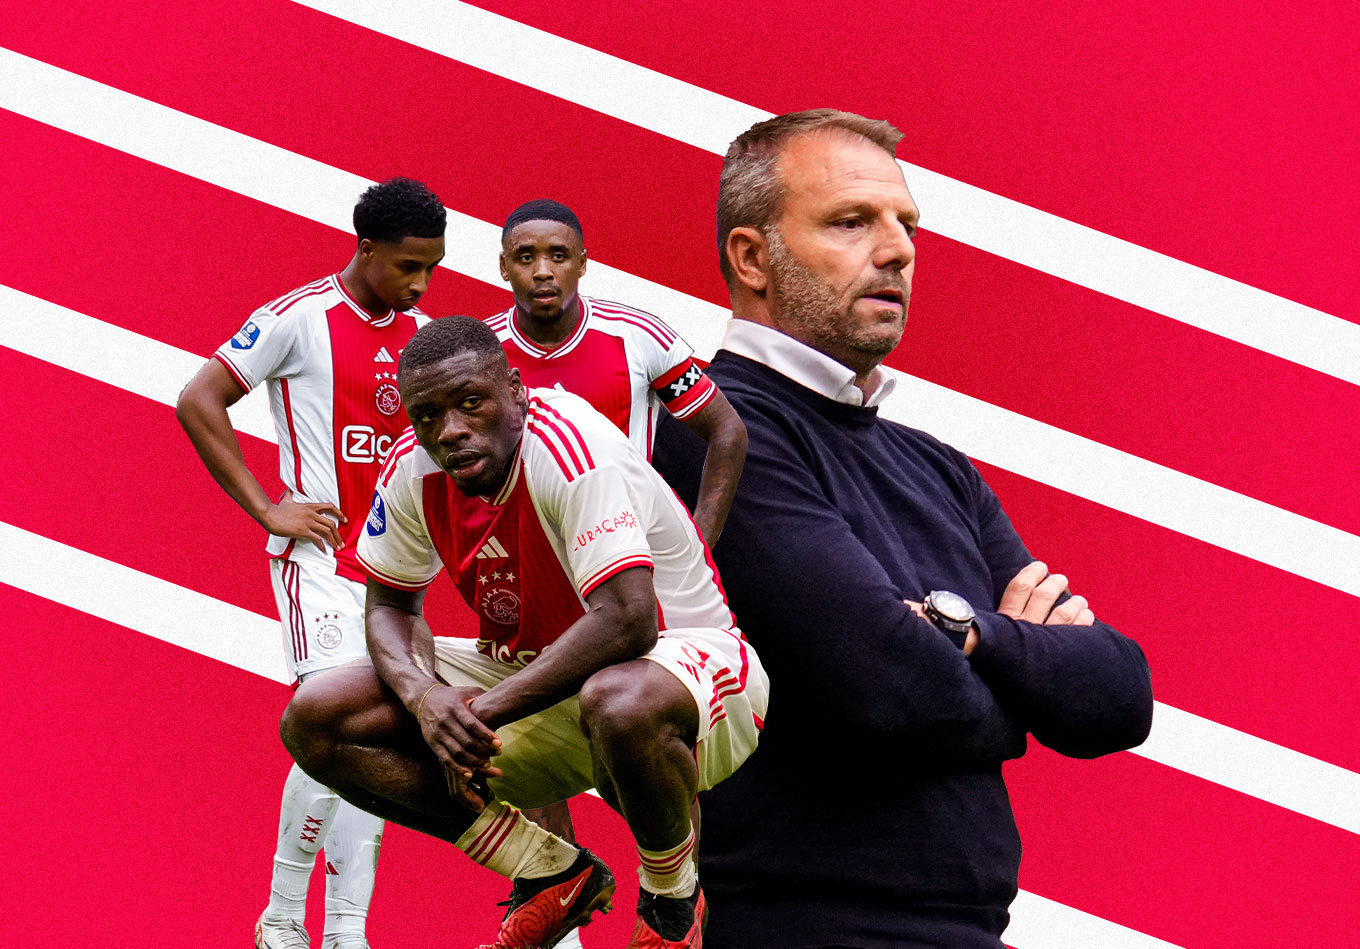 Ajax Might Just Be The Eredivisie'S Worst Team - What On Earth Is Going On?  | The Analyst